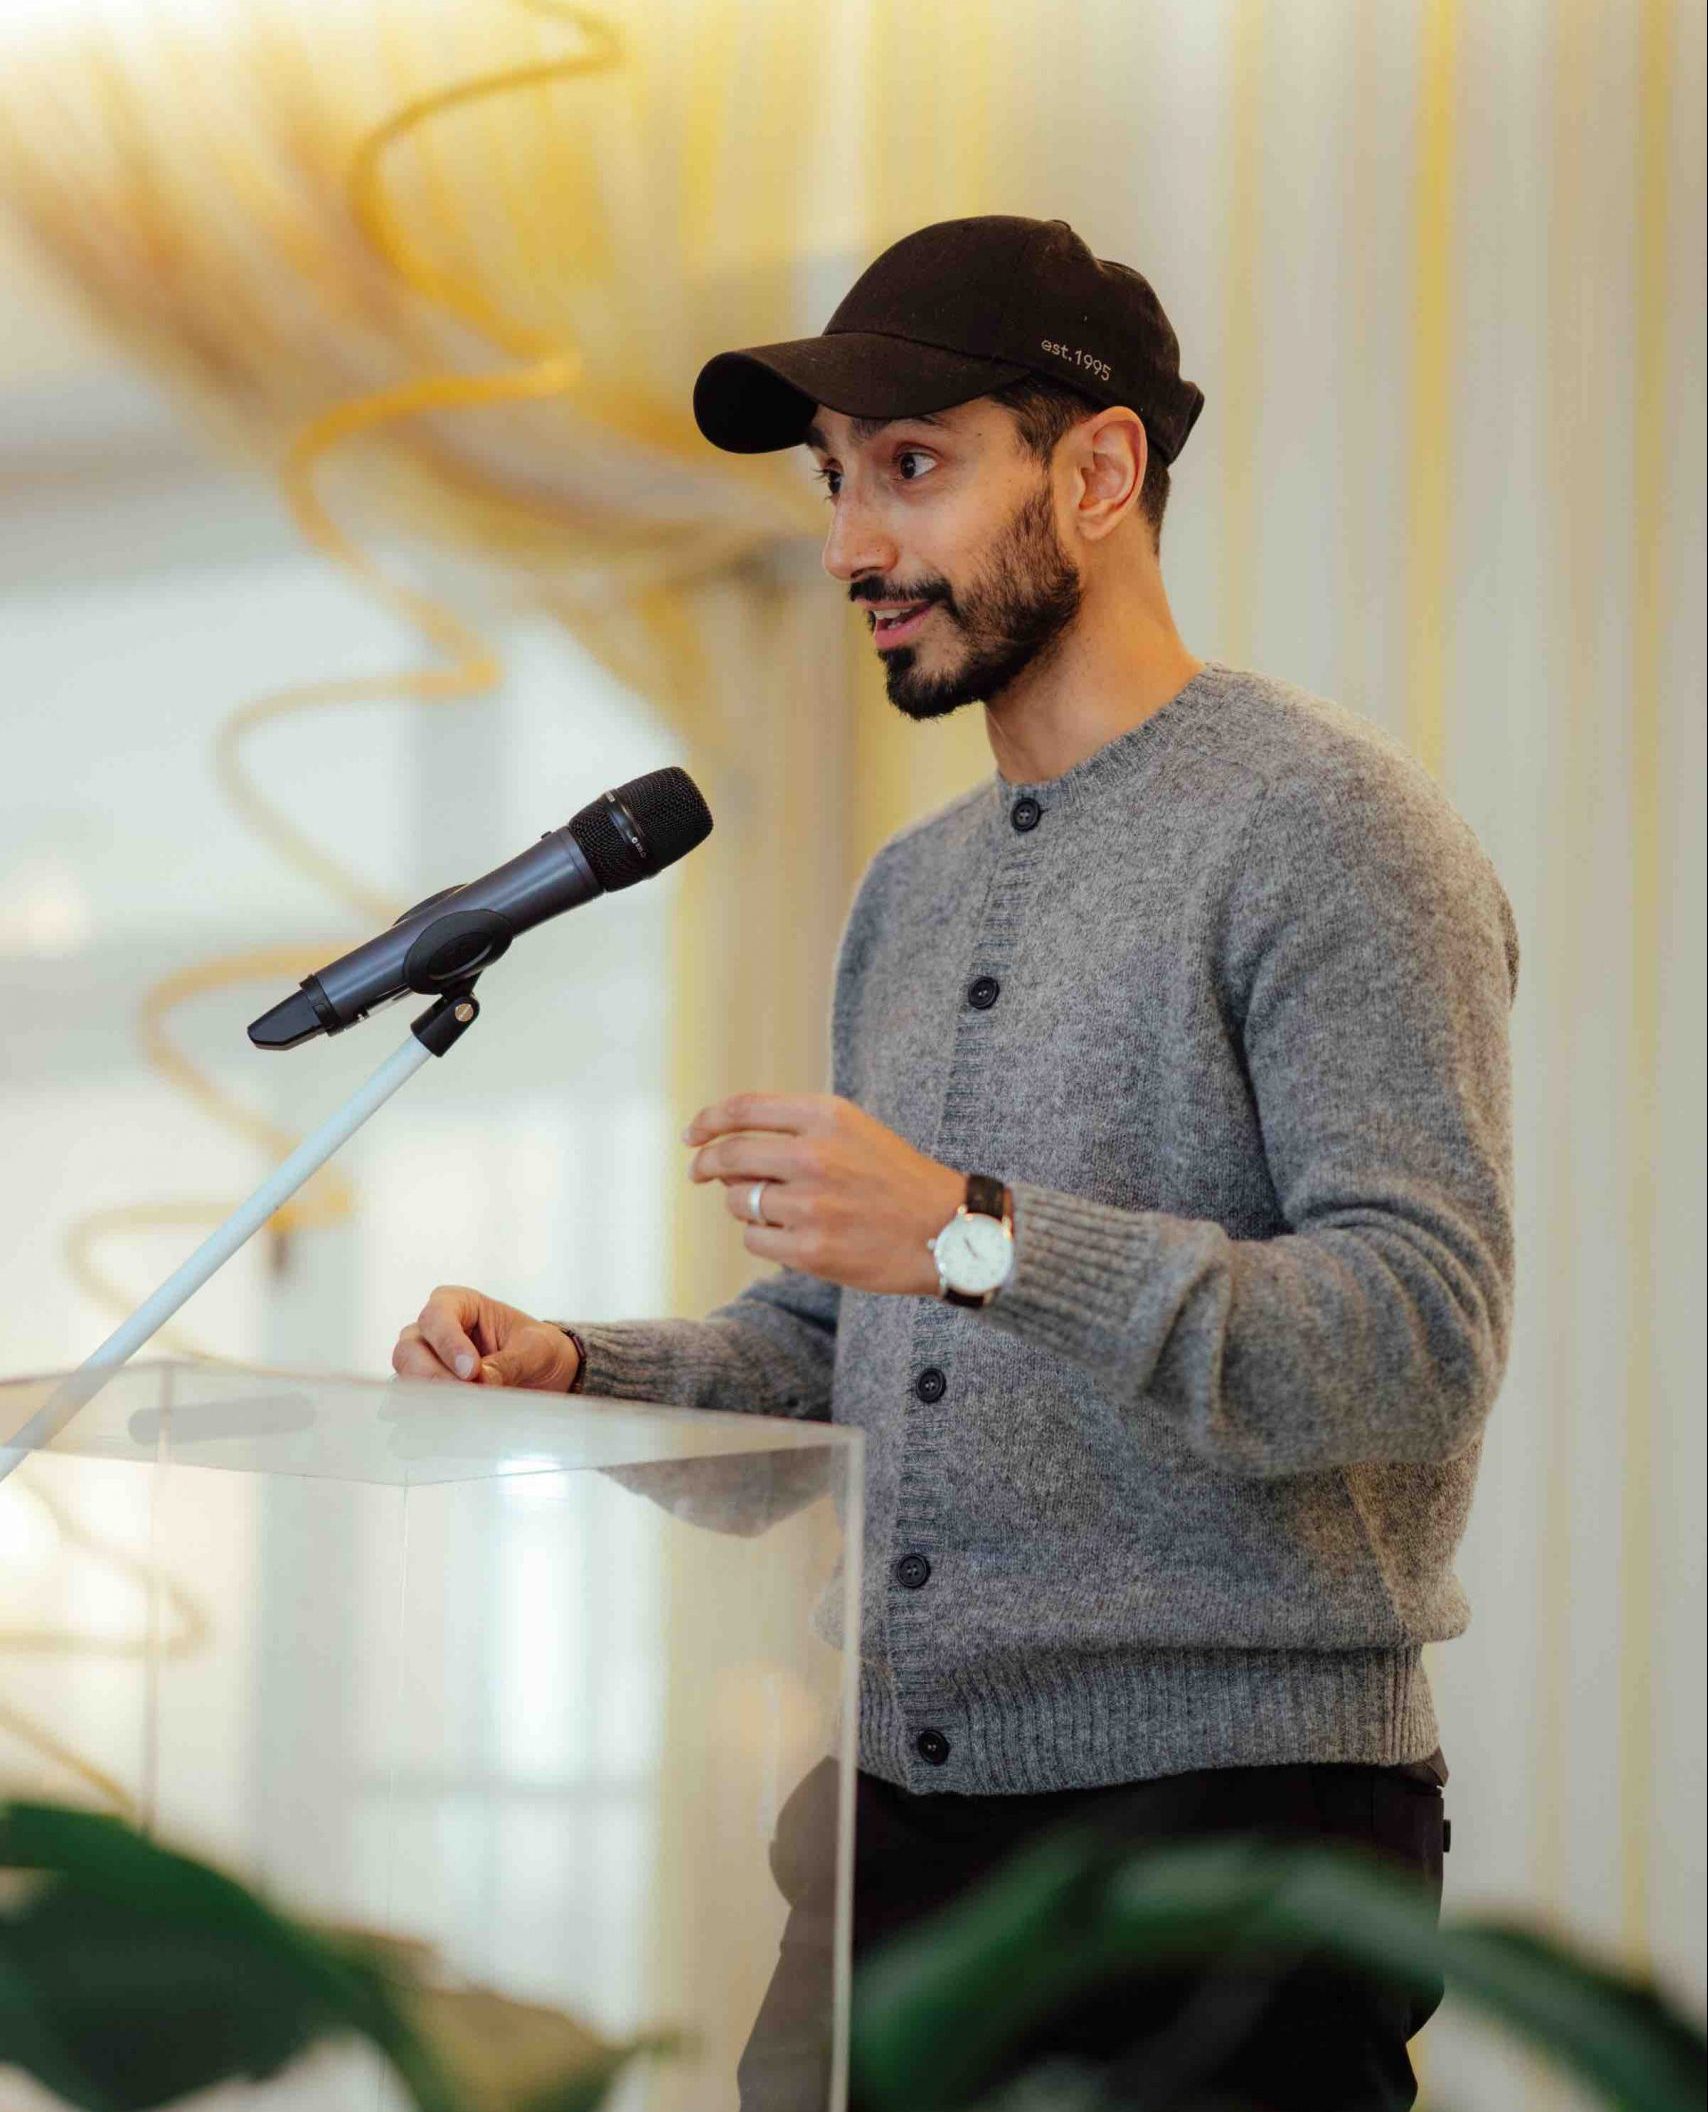 Actor Riz Ahmed wearing a grey button-up sweater and black cap stands in front of a clear lucite podium speaking into a microphone